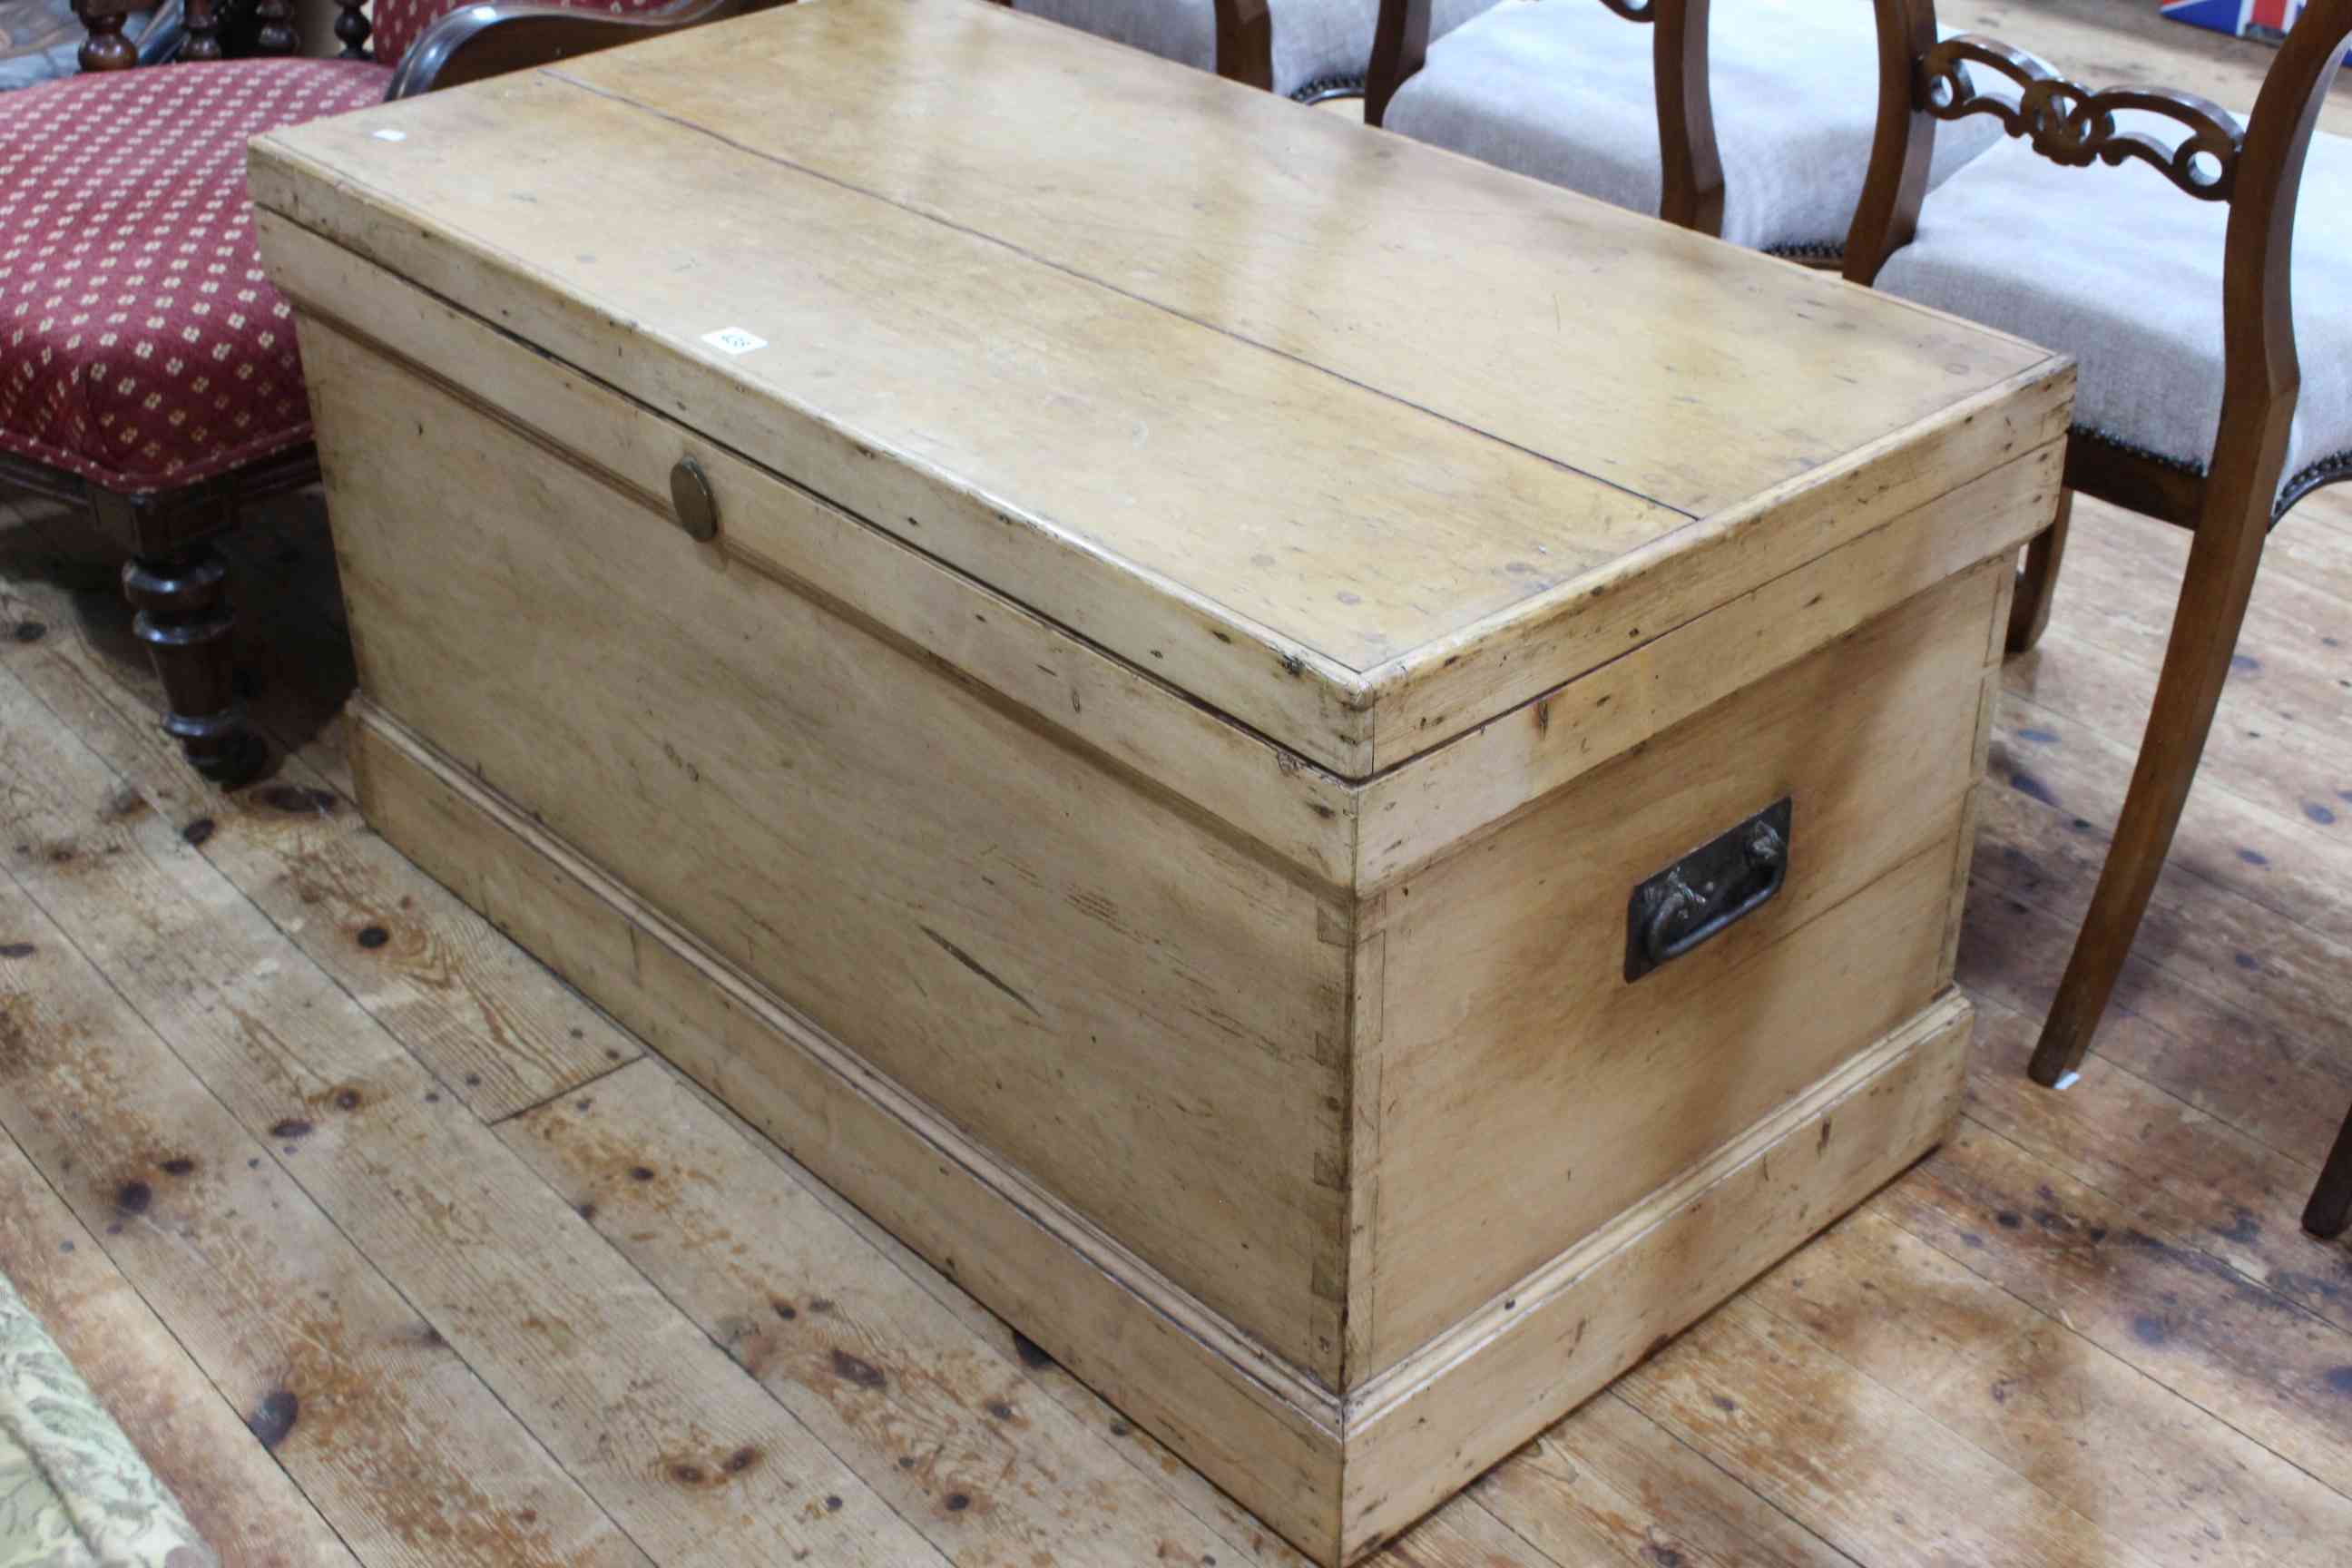 Waxed pine trunk with internal candle box and two drawers, 51 x 98 x 52.5cm.